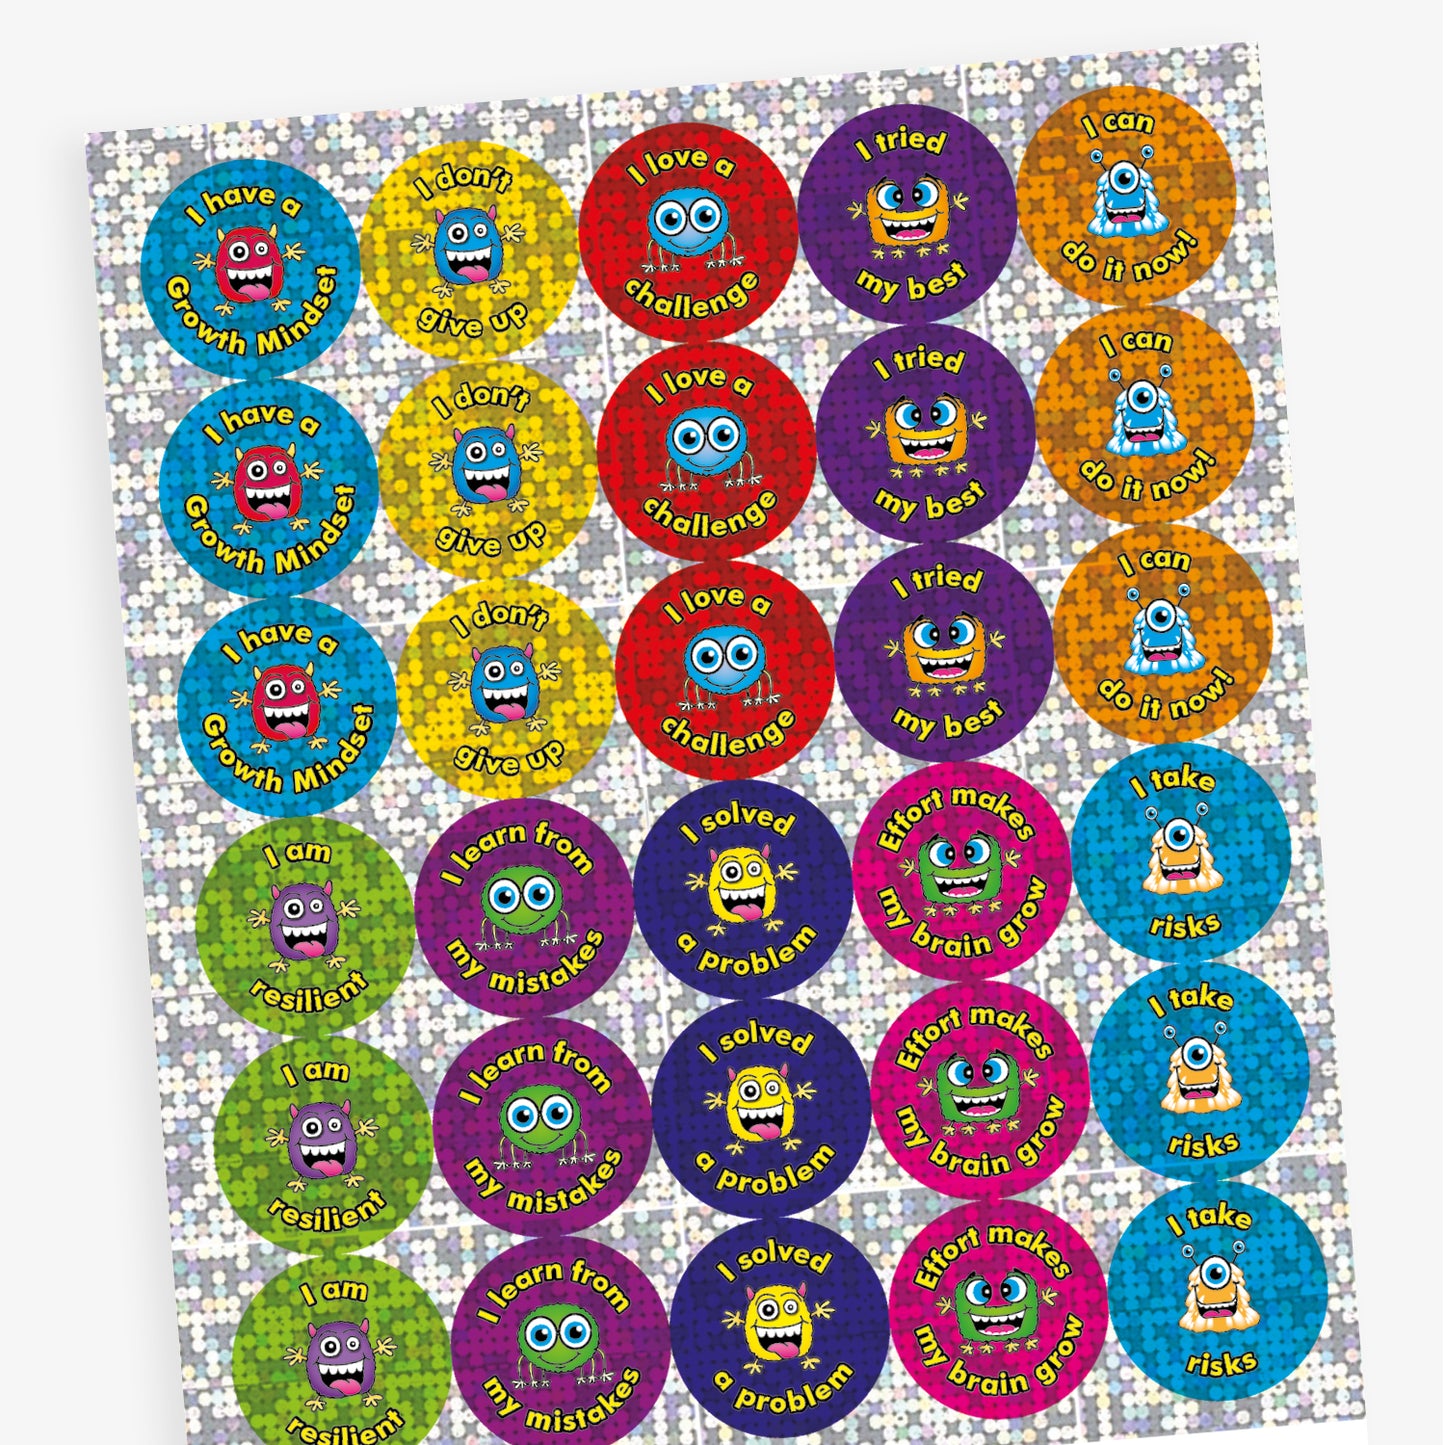 Holographic Growth Mindset Stickers - 25mm